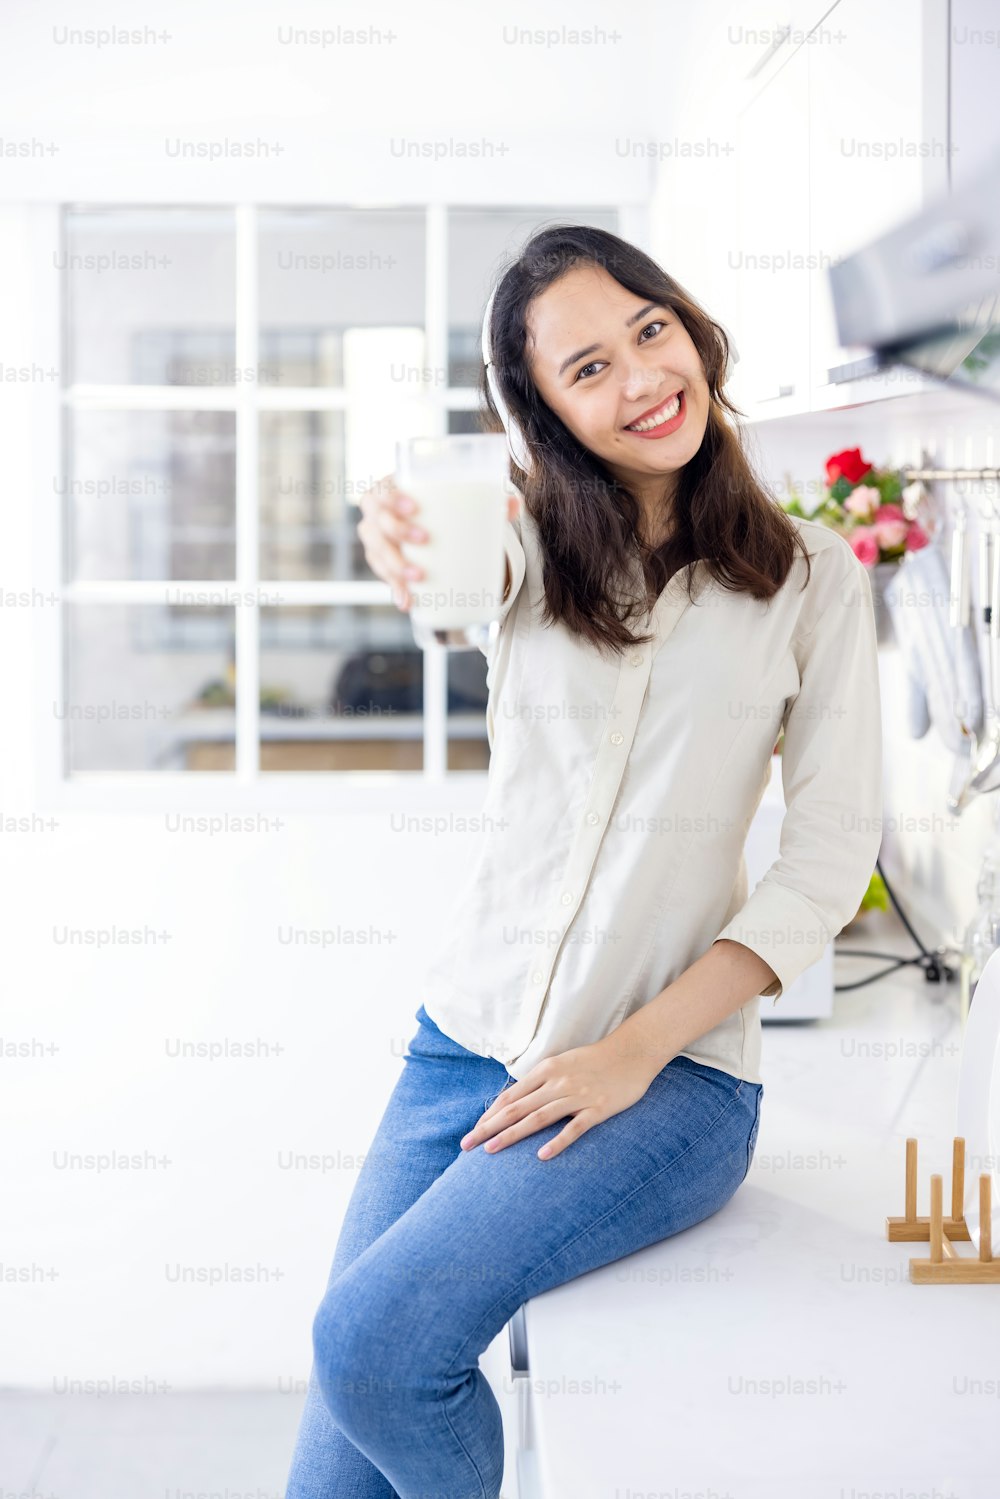 Beautiful woman drinking milk while listening to music in light modern kitchen. she is fun and smiling before breakfast.